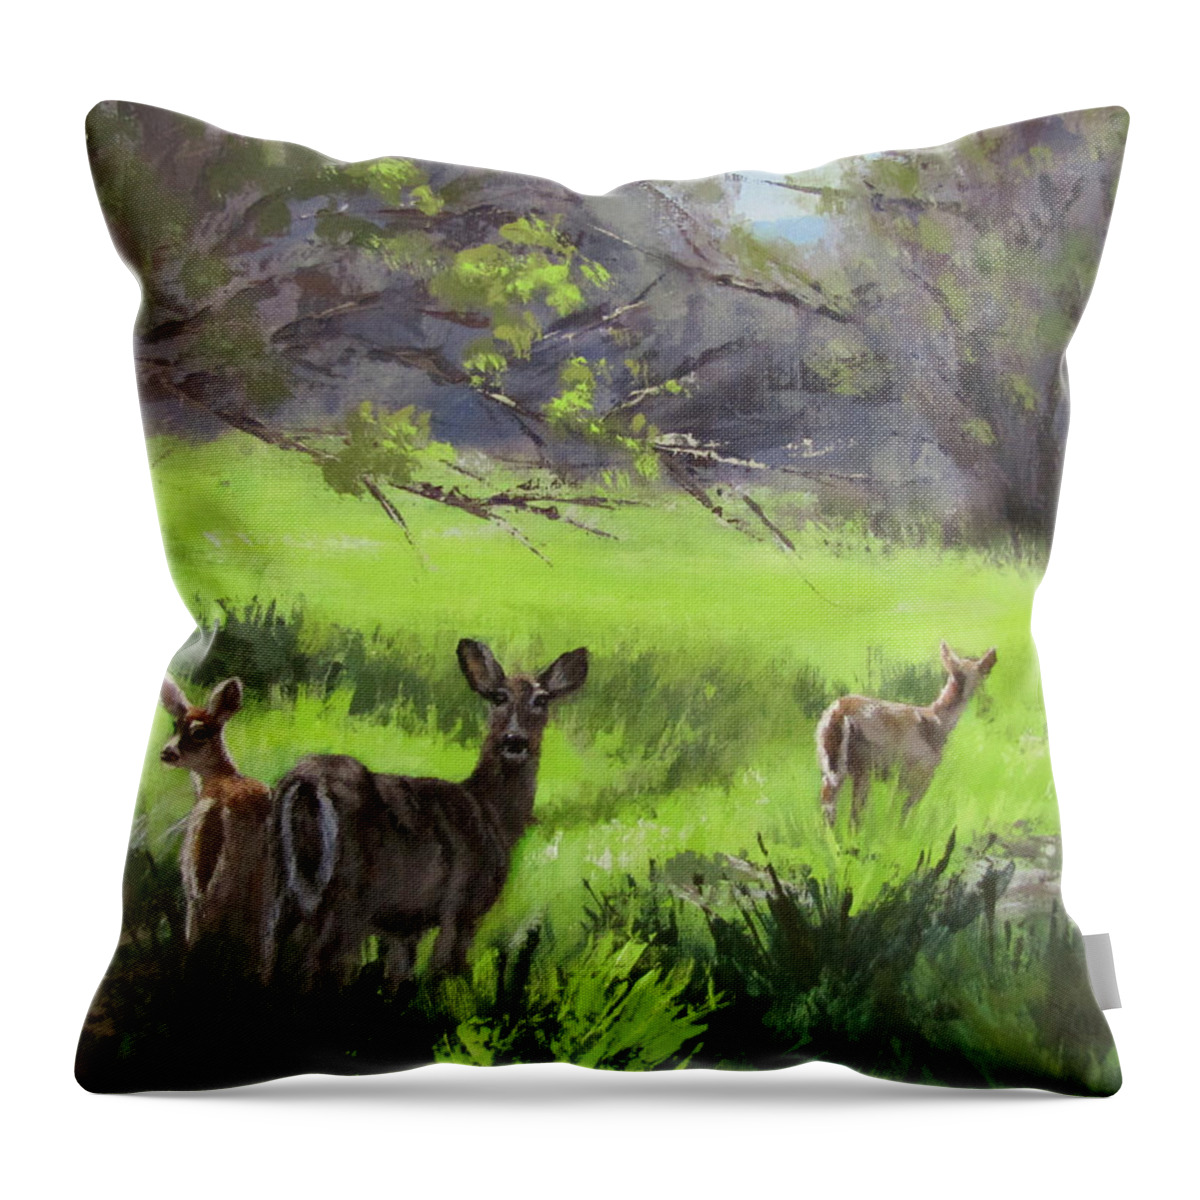 Deer Throw Pillow featuring the painting Family Outing by Karen Ilari